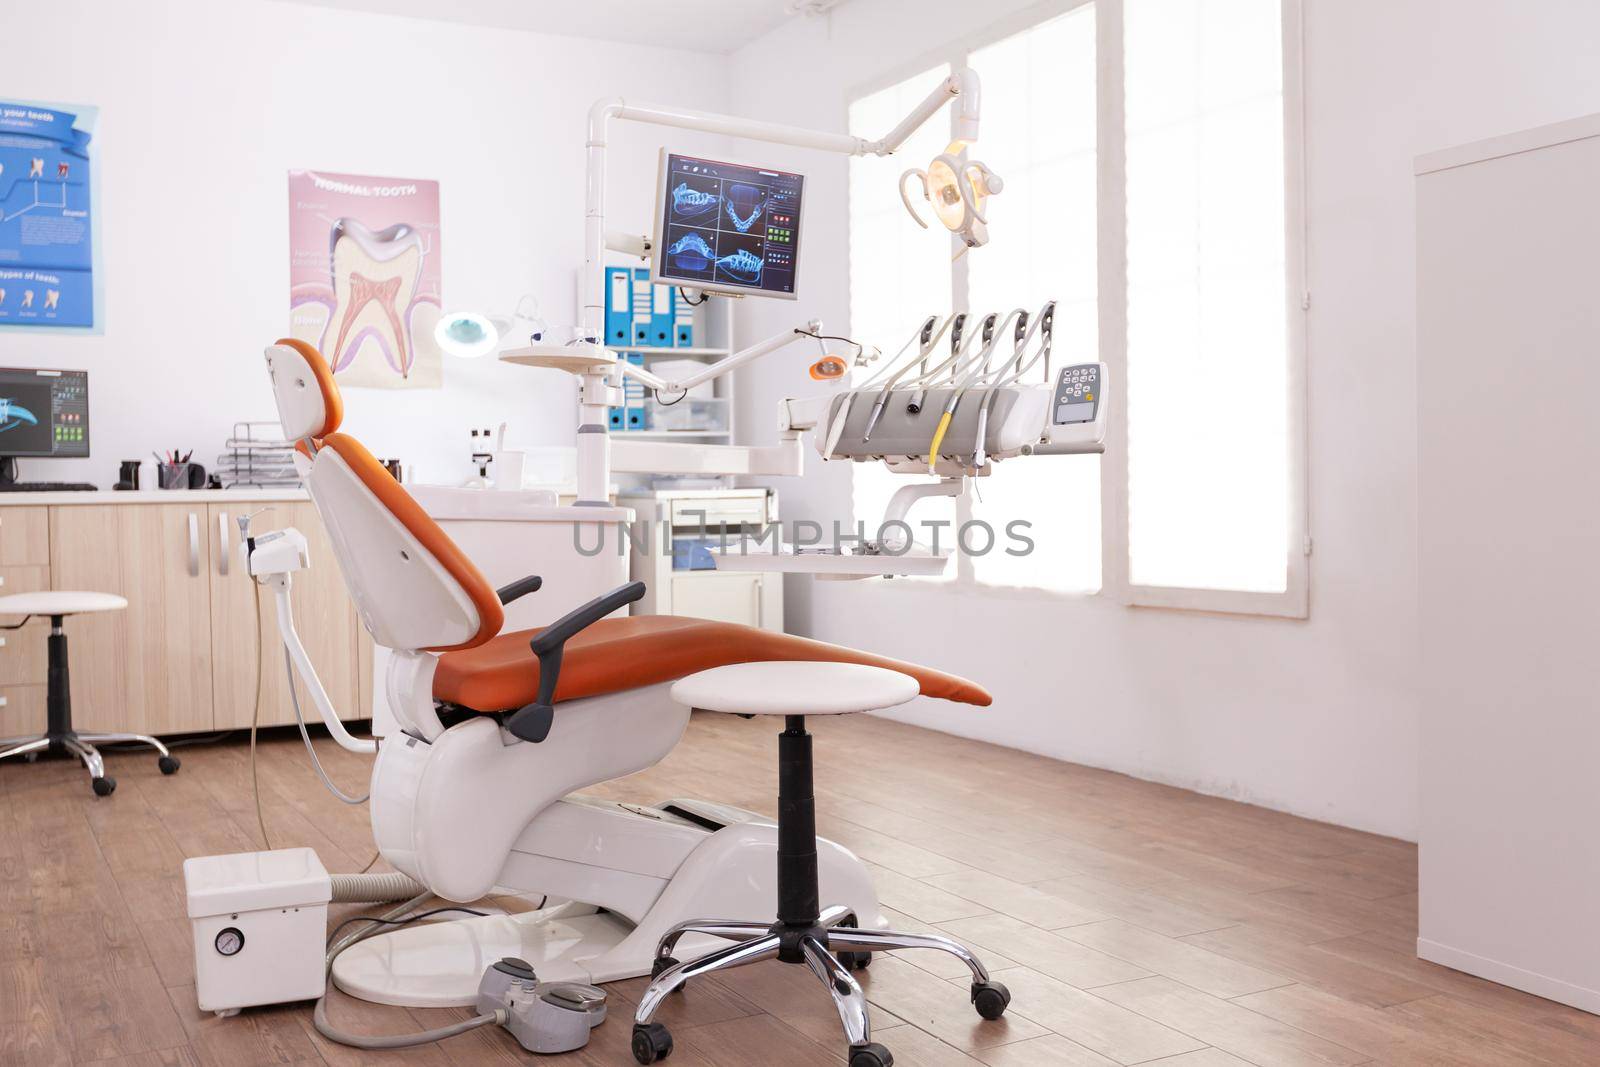 Empty stomatology orthodontist hospital office room equipped with teethcare instruments and dental medical chiarequipment. Orthodontic cabinet prepared for dentistry healthcare treatment